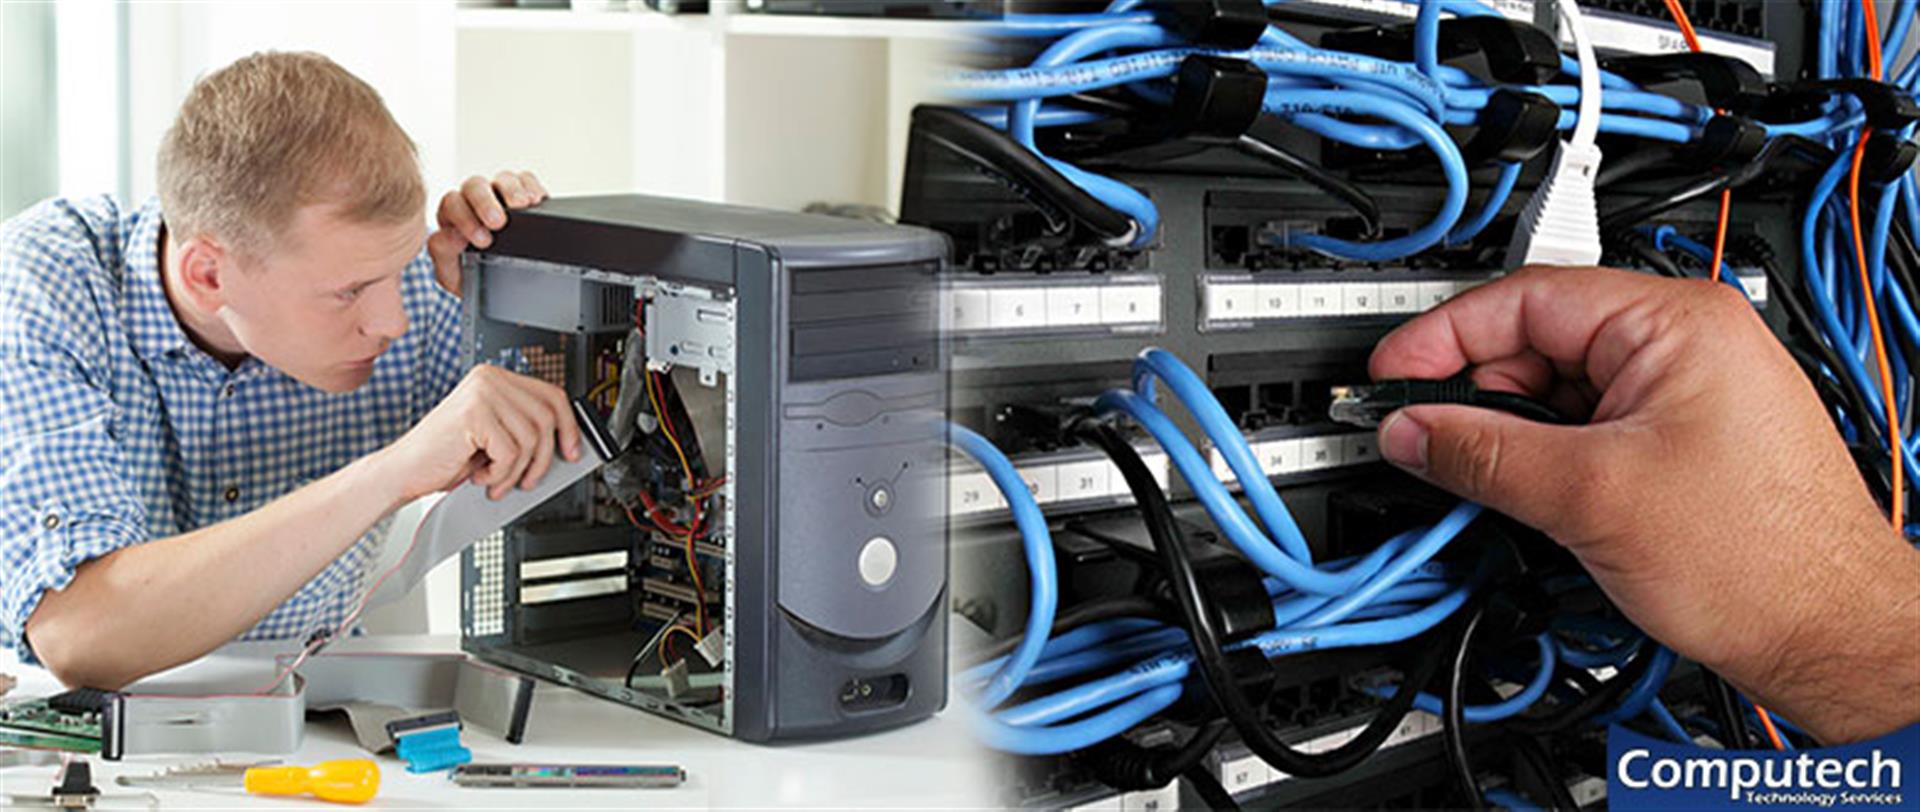 Fairburn Georgia On Site Computer PC & Printer Repairs, Networking, Voice & Data Cabling Solutions